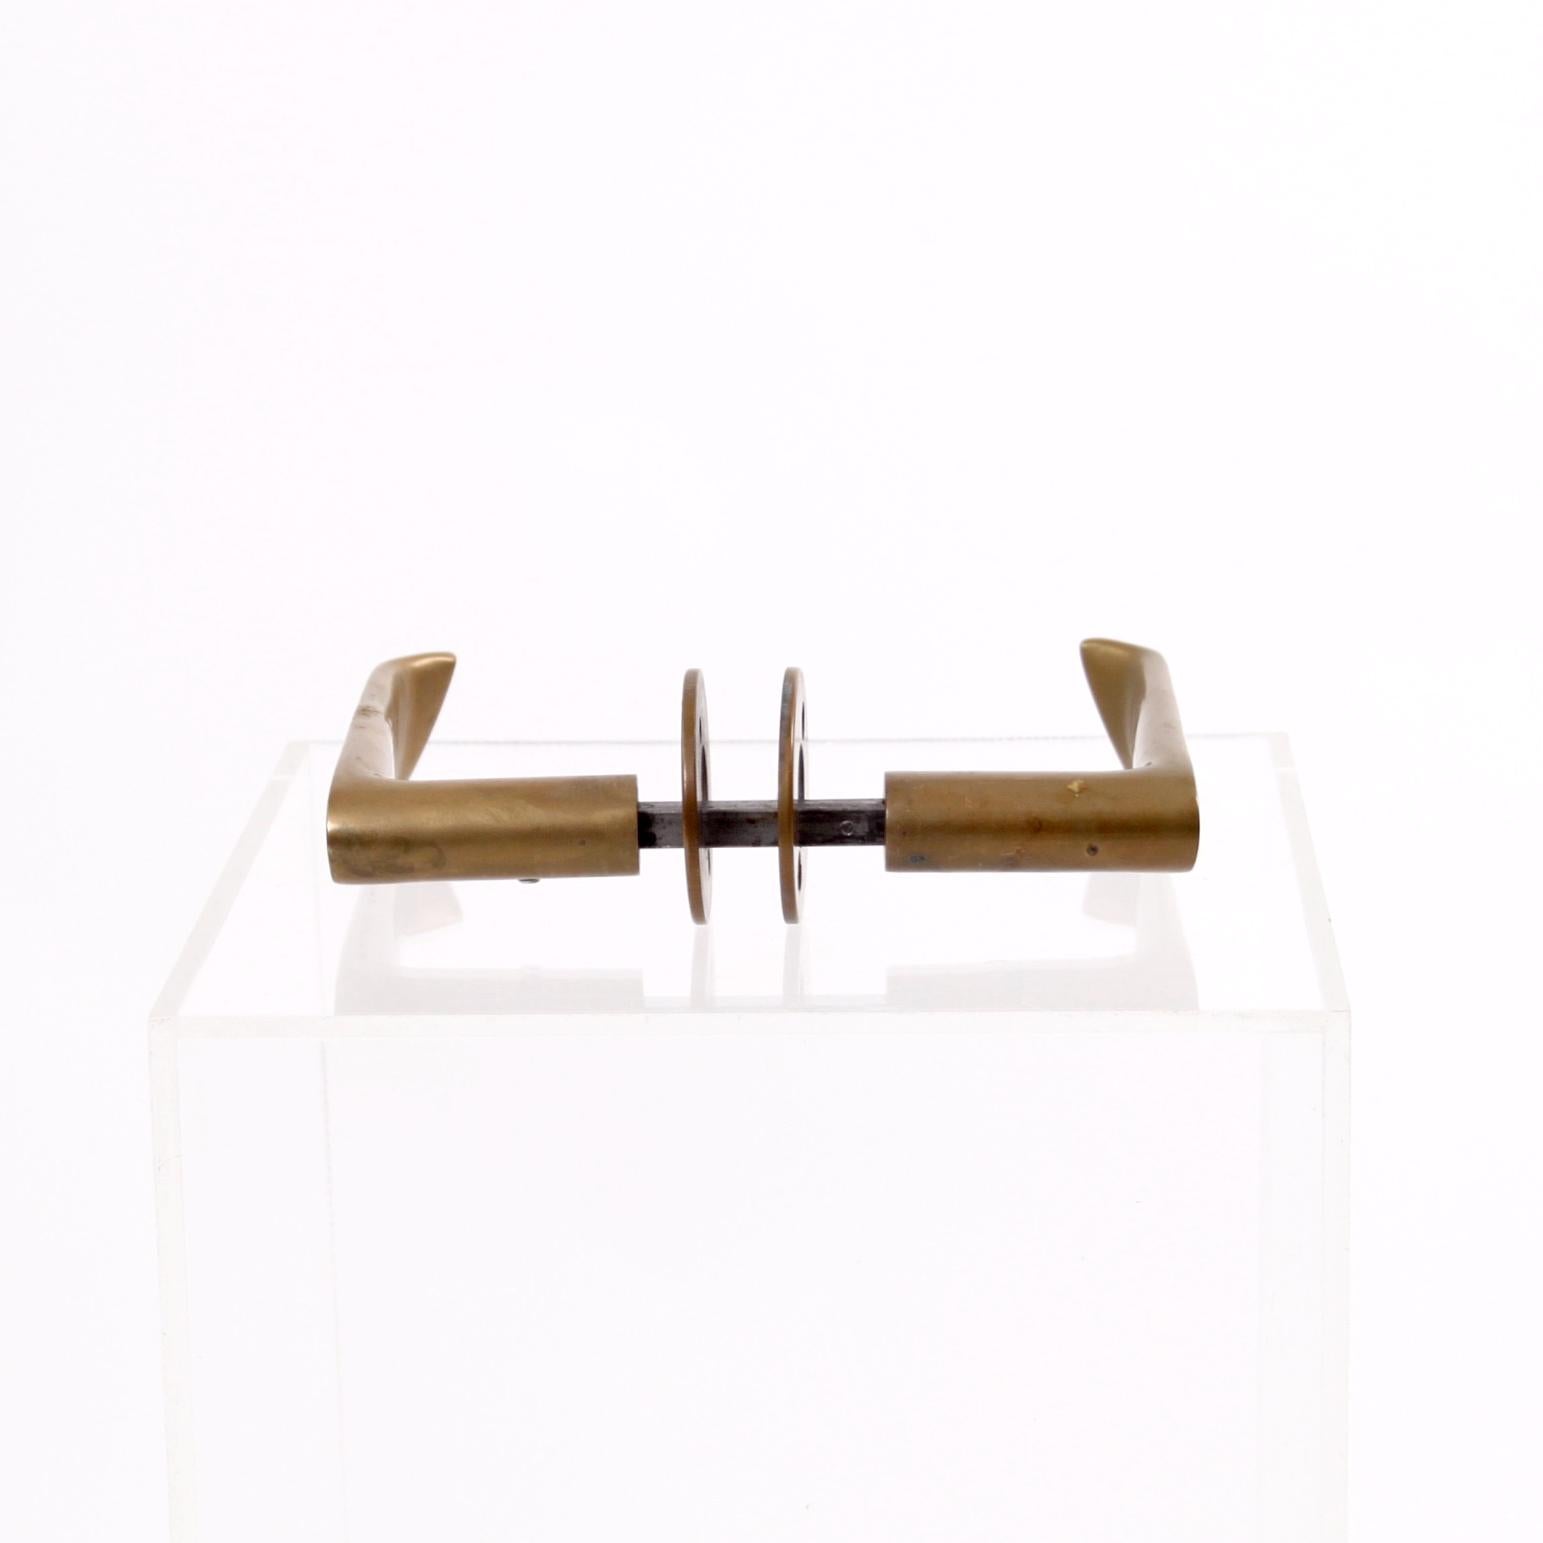 A collection of twelve sculptural Alvar Aalto door handles.

The handles are designed in the 1950s and made of solid brass. 

They are in excellent condition with patina.